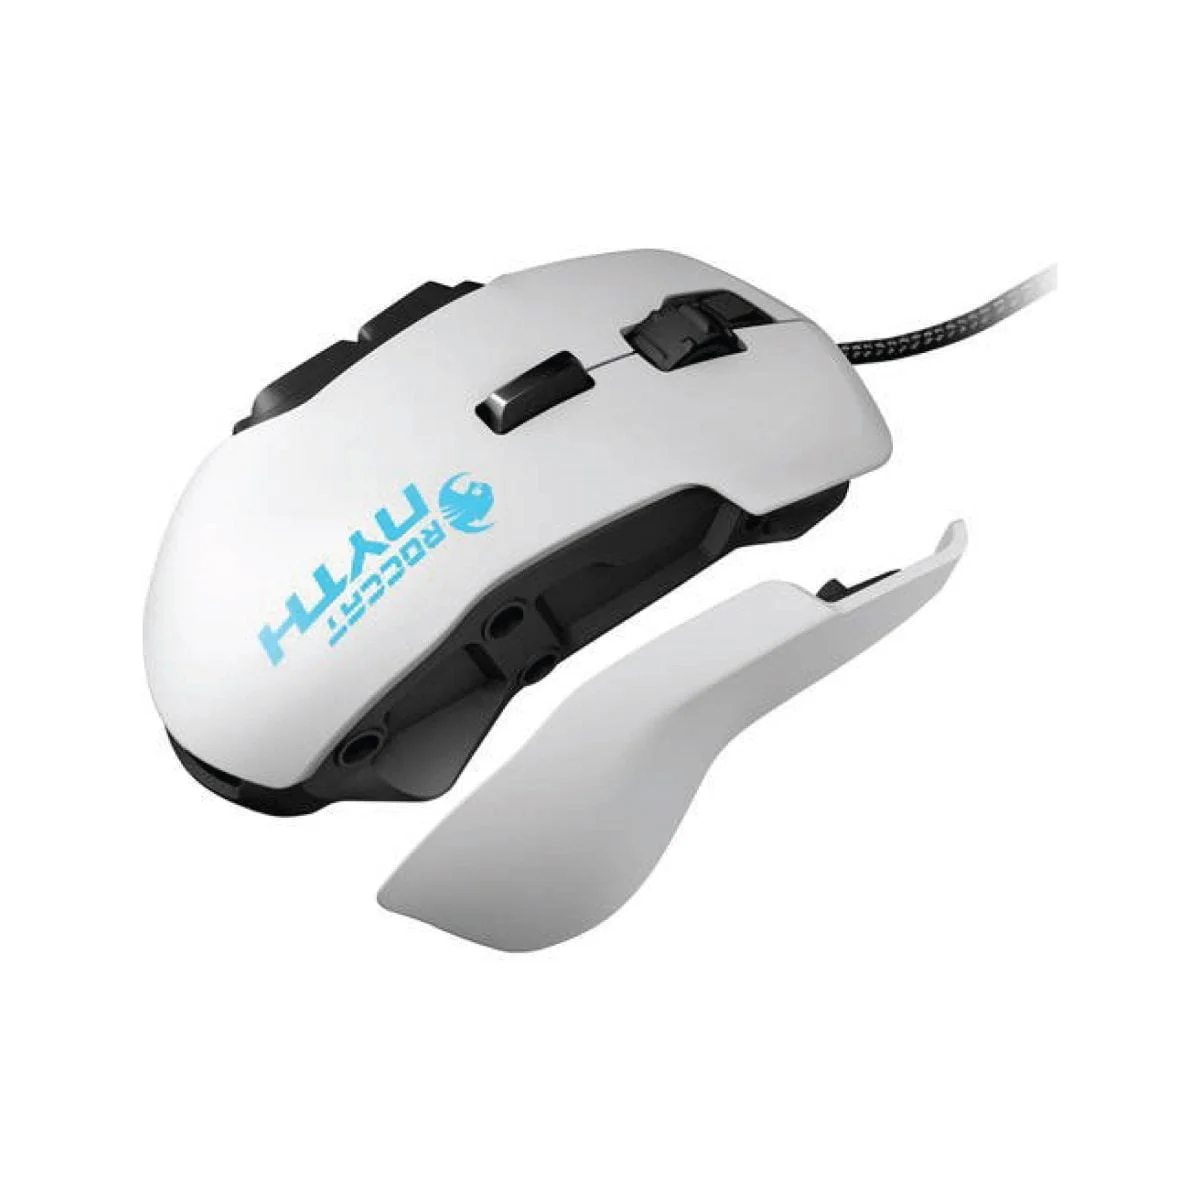 64D 04 Scaled Roccat &Lt;Div Id=&Quot;Shopify-Section-Product-Template&Quot; Class=&Quot;Shopify-Section&Quot;&Gt; &Lt;Div Id=&Quot;Productsection-Product-Template&Quot; Class=&Quot;Product-Template__Container Page-Width&Quot; Data-Section-Id=&Quot;Product-Template&Quot; Data-Section-Type=&Quot;Product&Quot; Data-Enable-History-State=&Quot;True&Quot; Data-Ajax-Enabled=&Quot;True&Quot;&Gt; &Lt;Div Class=&Quot;Grid Product-Single Product-Single--Medium-Media&Quot;&Gt; &Lt;Div Class=&Quot;Grid__Item Medium-Up--One-Half&Quot;&Gt; &Lt;Div Class=&Quot;Product-Single__Description Rte&Quot;&Gt; The Roccat Nyth Is A Customizable 18-Button Mmo Gaming Mouse With A Laser Sensor With Up To 12.000 Dpi. Order Yours Today. &Nbsp; &Lt;/Div&Gt; &Lt;/Div&Gt; &Lt;/Div&Gt; &Lt;/Div&Gt; &Lt;/Div&Gt; Https://Youtu.be/5Pwxxksrsty Roccat Roccat Nyth Modular Mmo Gaming Mouse, White